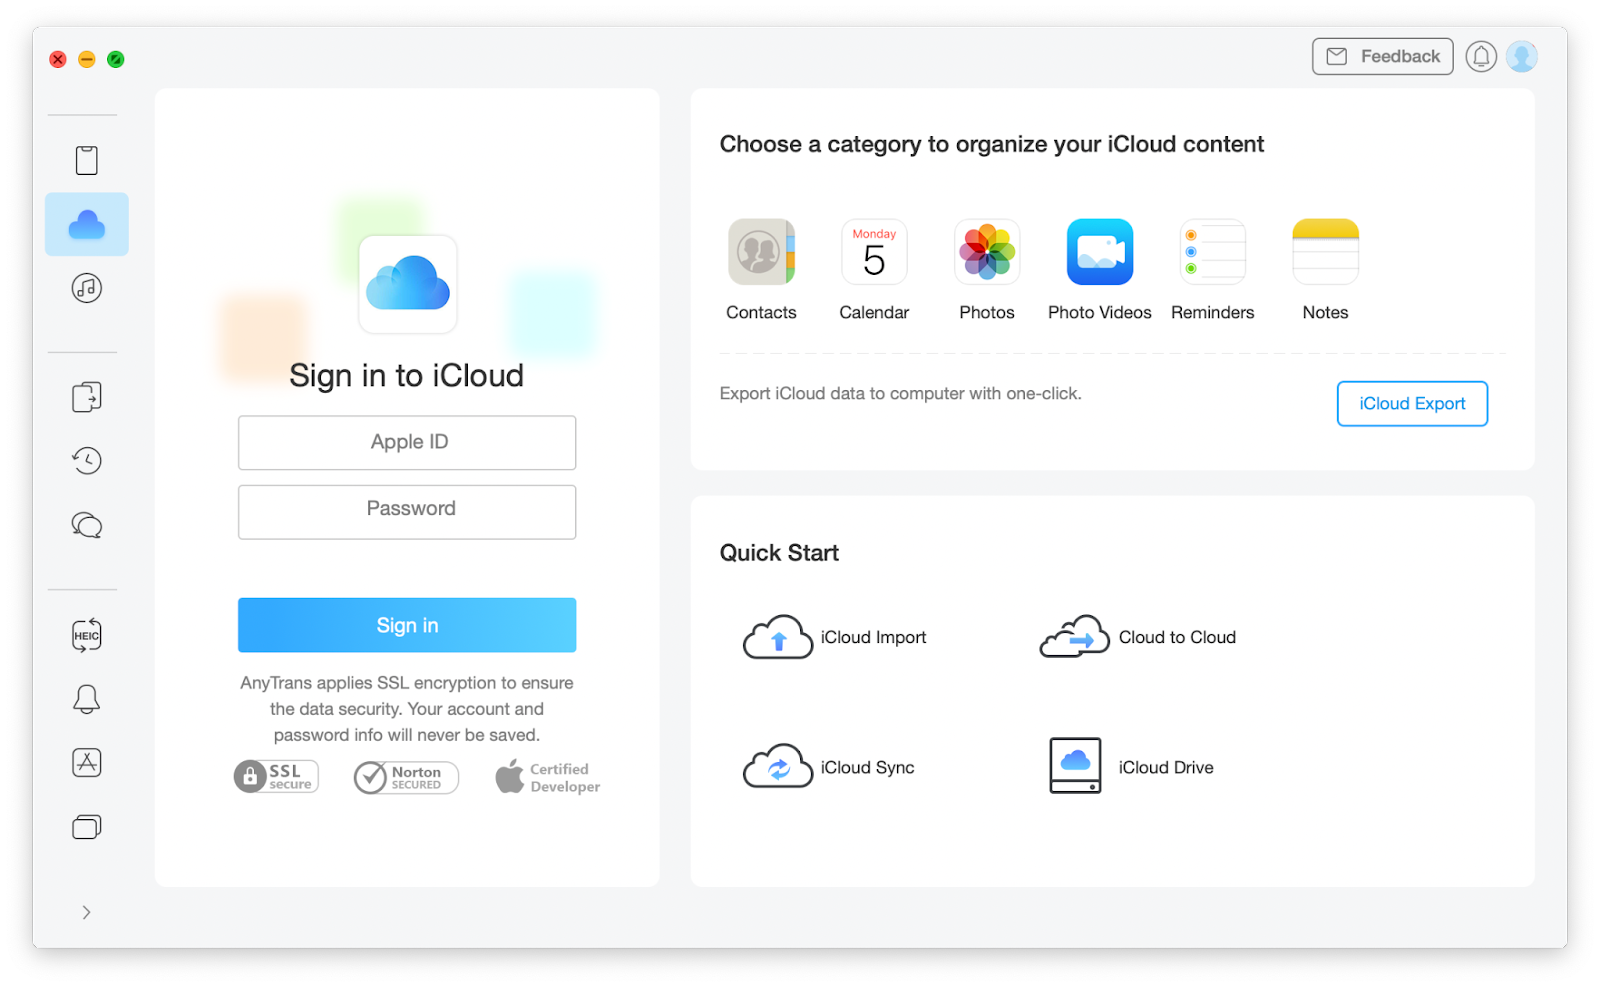 iCloud manager